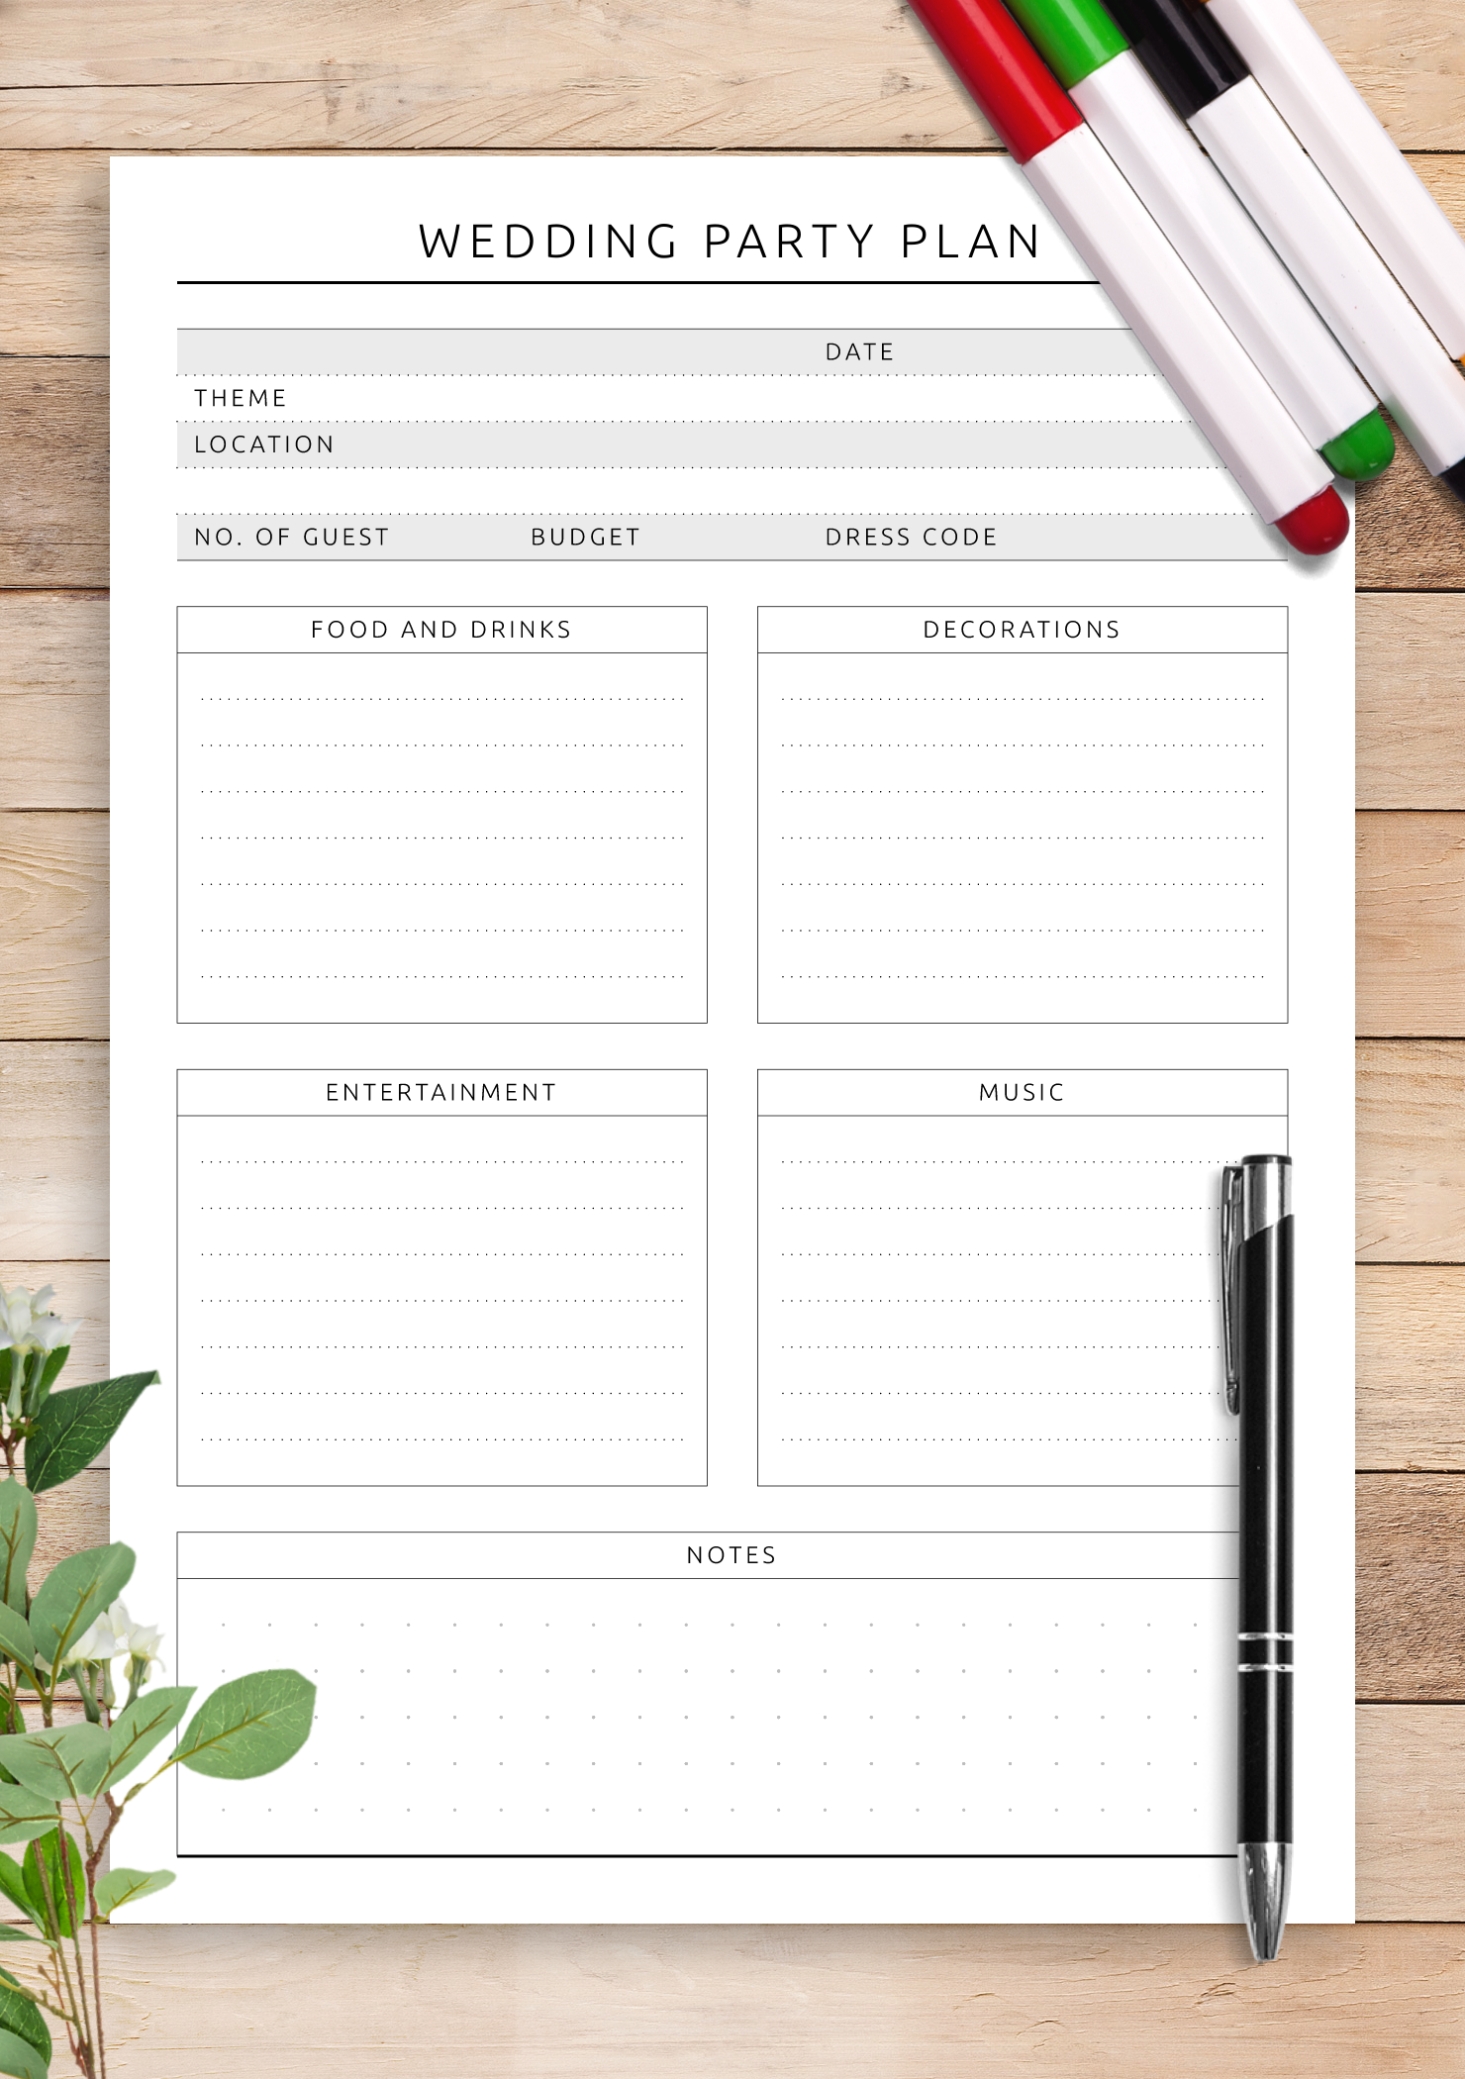 Download Printable Wedding Party Planner Template - Original Pdf inside Party Agenda Template